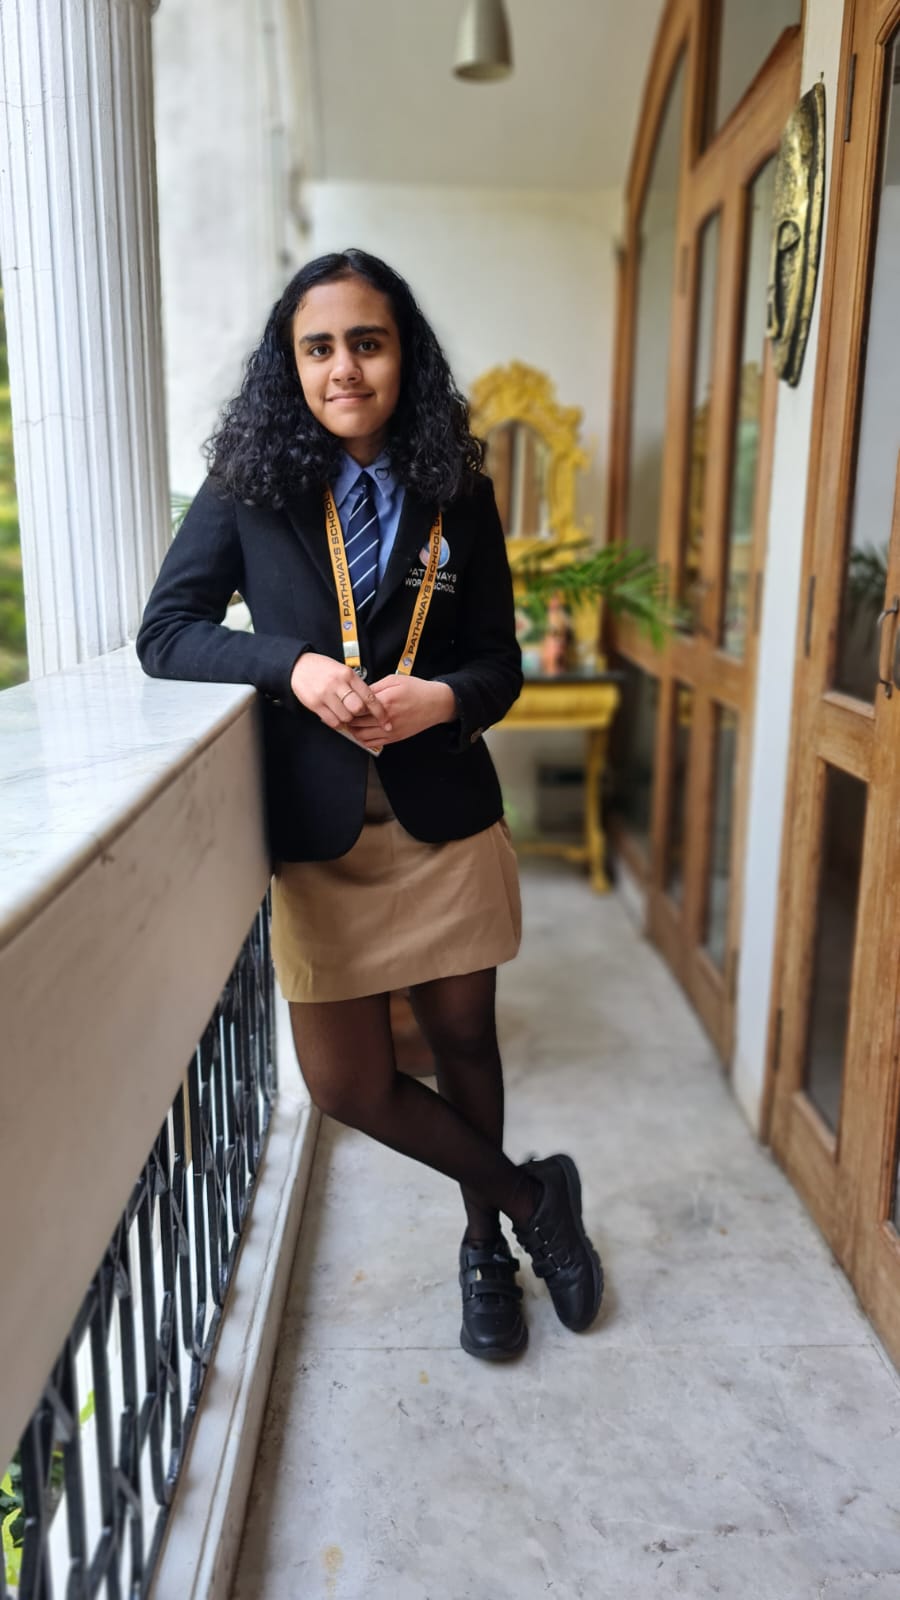 Anoushka Jolly experienced bullying at a young age at her Pathway School in Gurugram